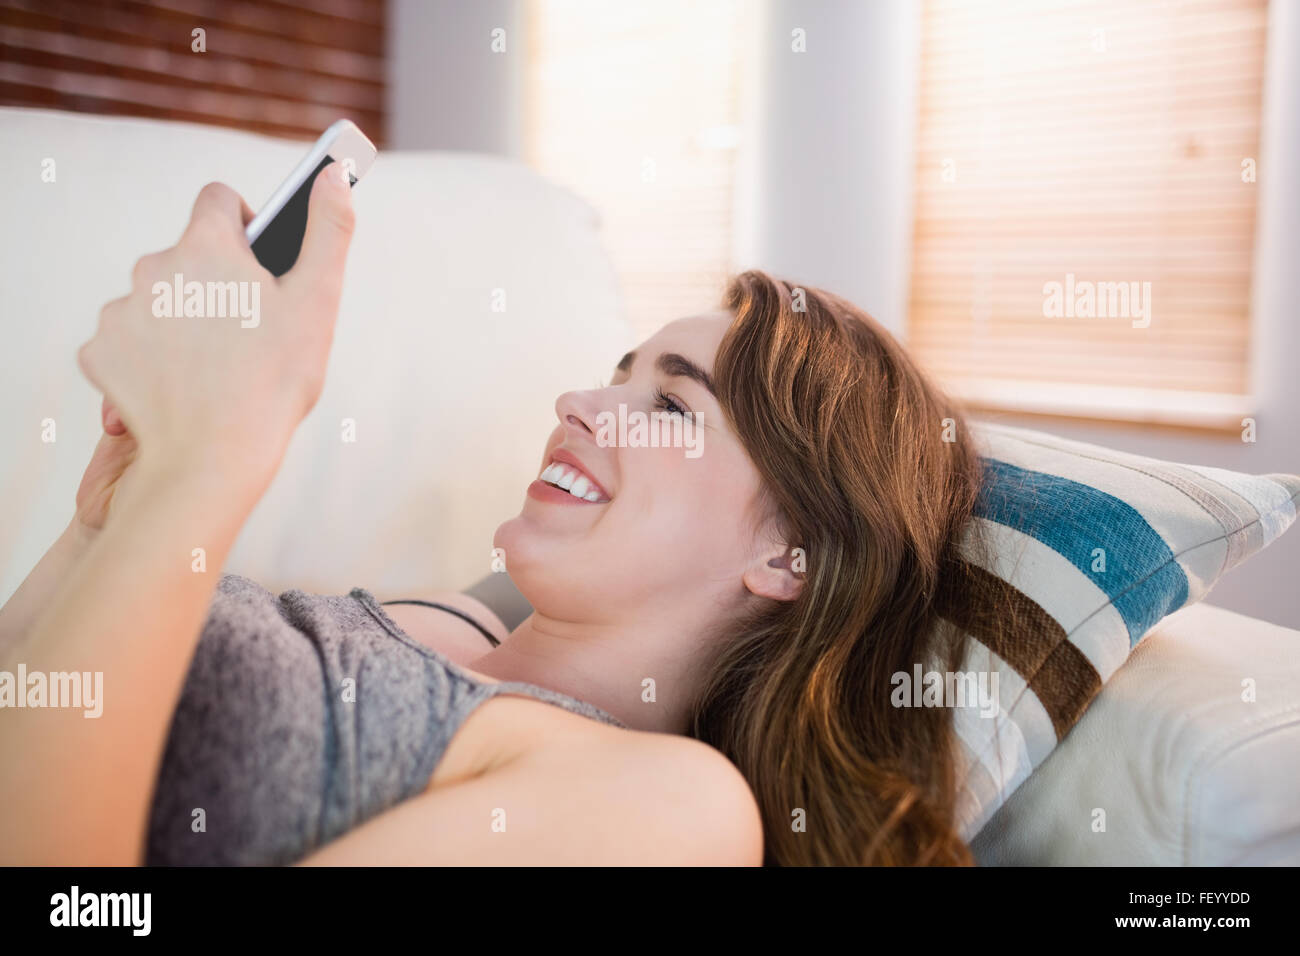 Pretty woman lying on the couch using phone Stock Photo